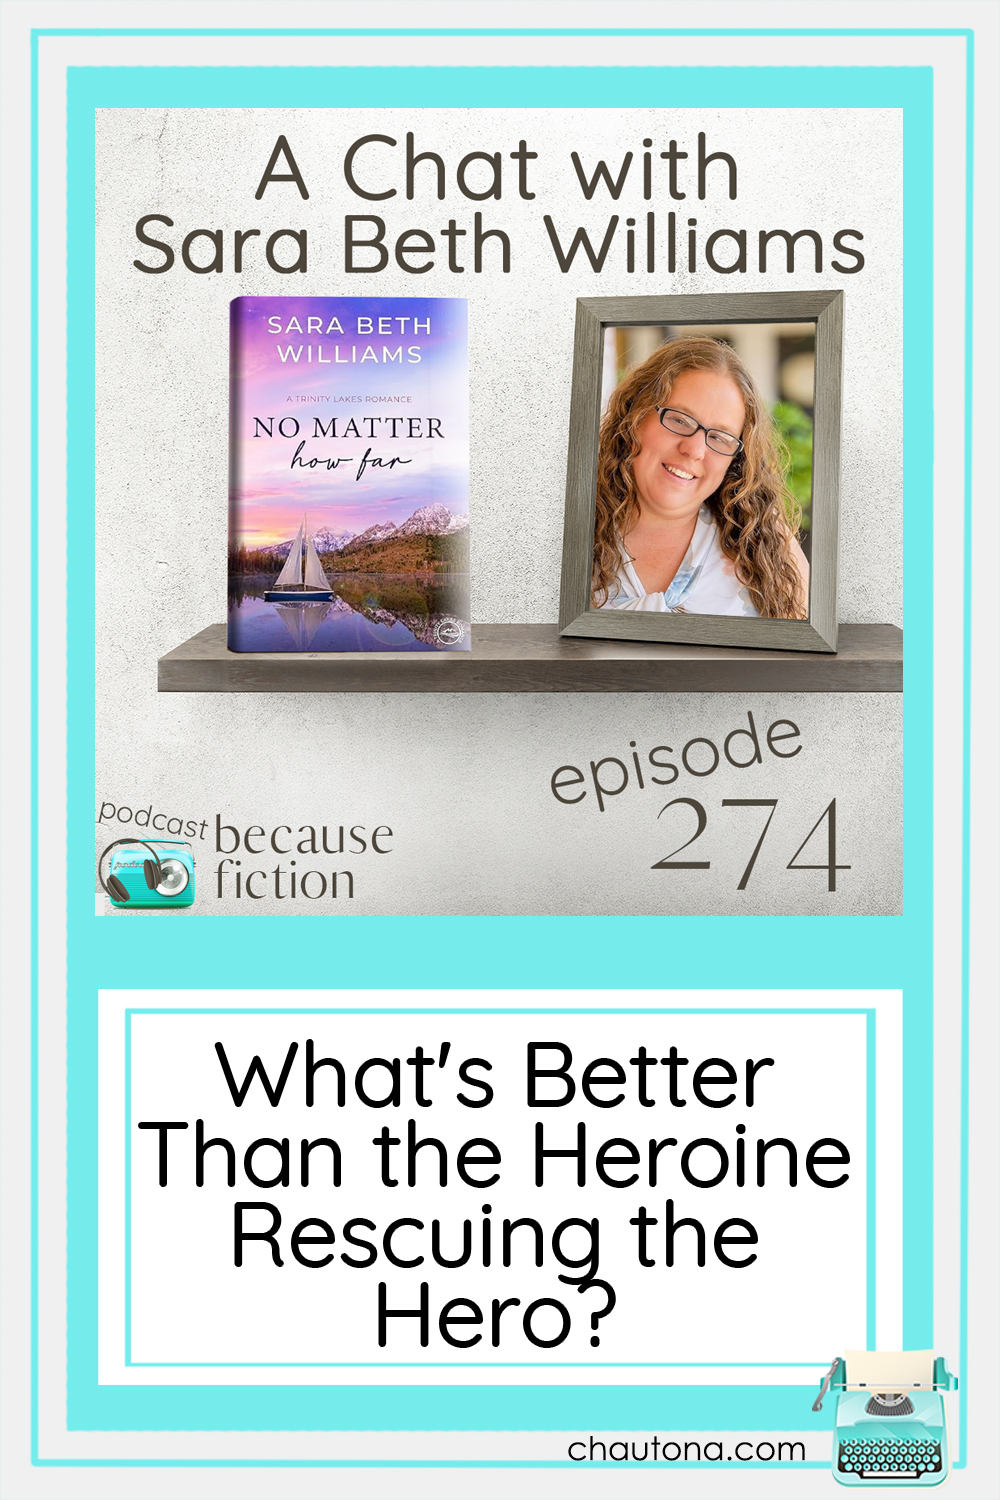 No Matter How Far by Sara Beth Williams is the seventh book in the Trinity Lakes Series. Listen in to learn more about this series! via @chautonahavig